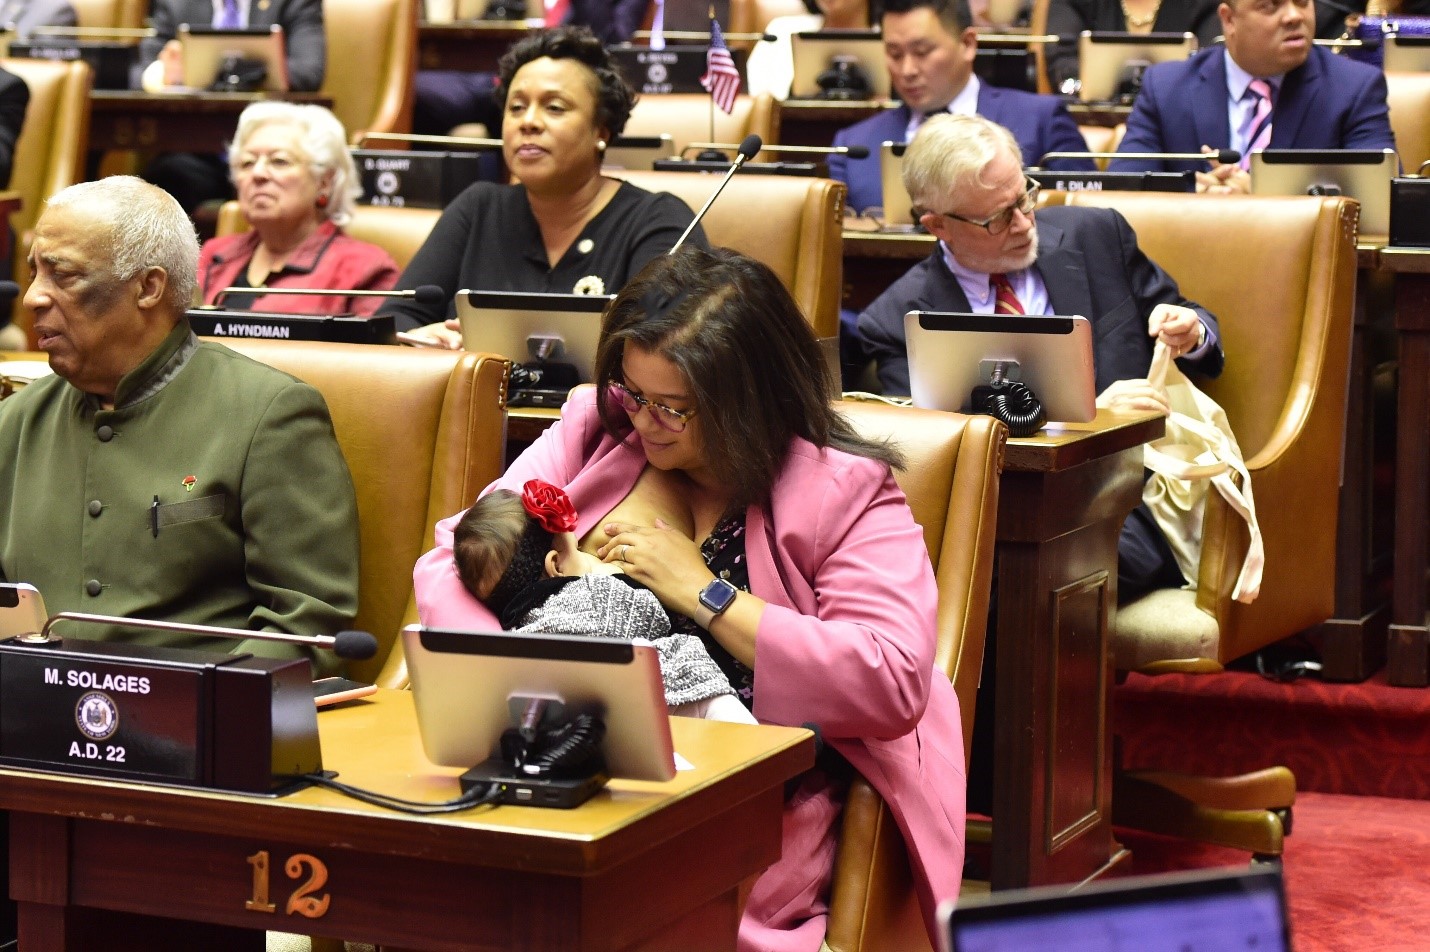 In 2019, Assemblywoman Michaelle Solages made State history when she breastfed her infant daughter on the floor of the State Assembly during the opening day of the legislative session.